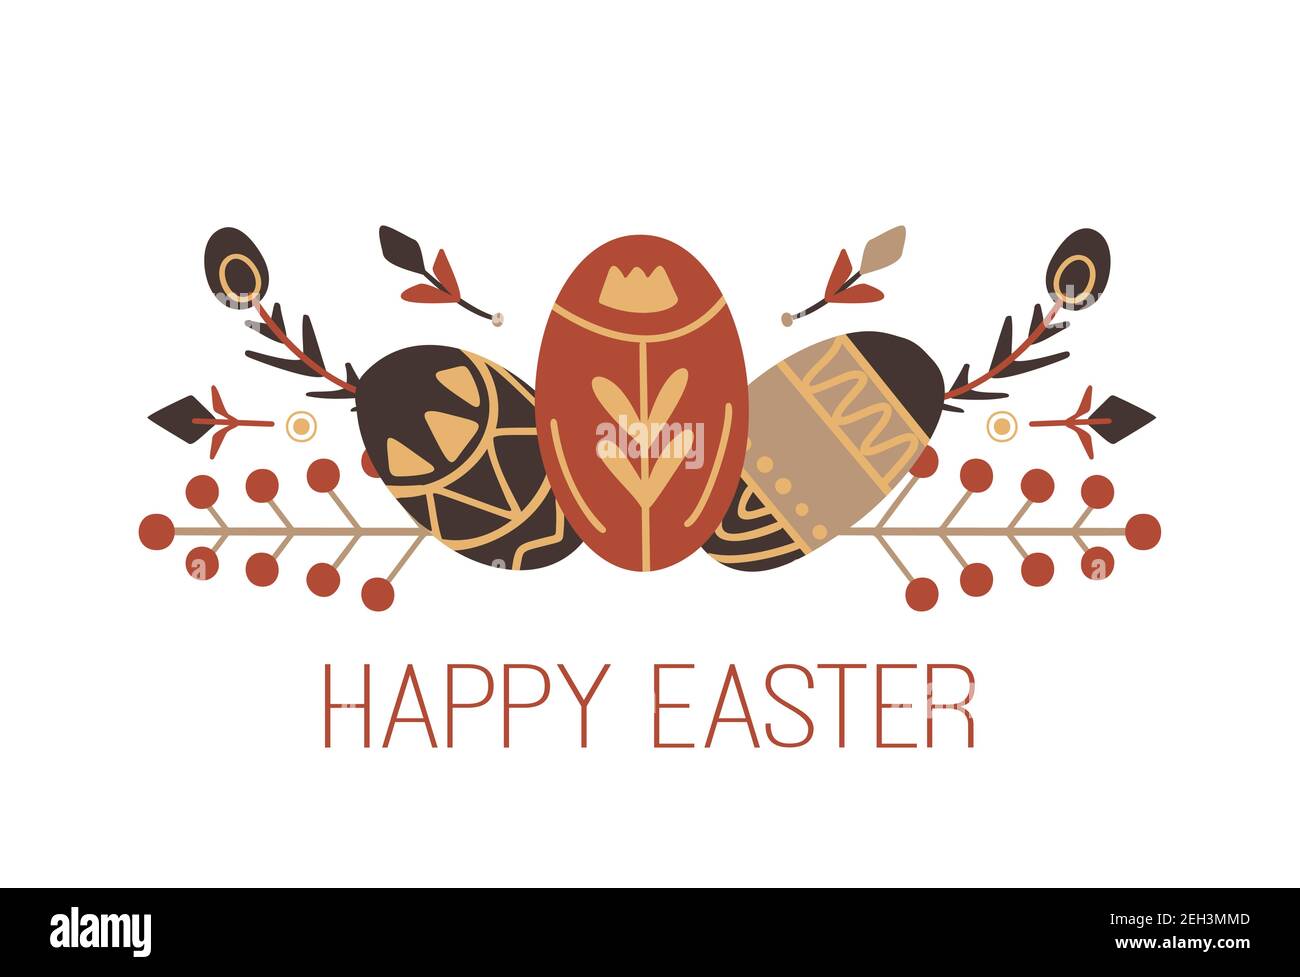 Happy Easter. Card with Easter egg and geometric floral branches with tribal decorations and lettering. Festive spring treat with wishes. Postcard wit Stock Vector